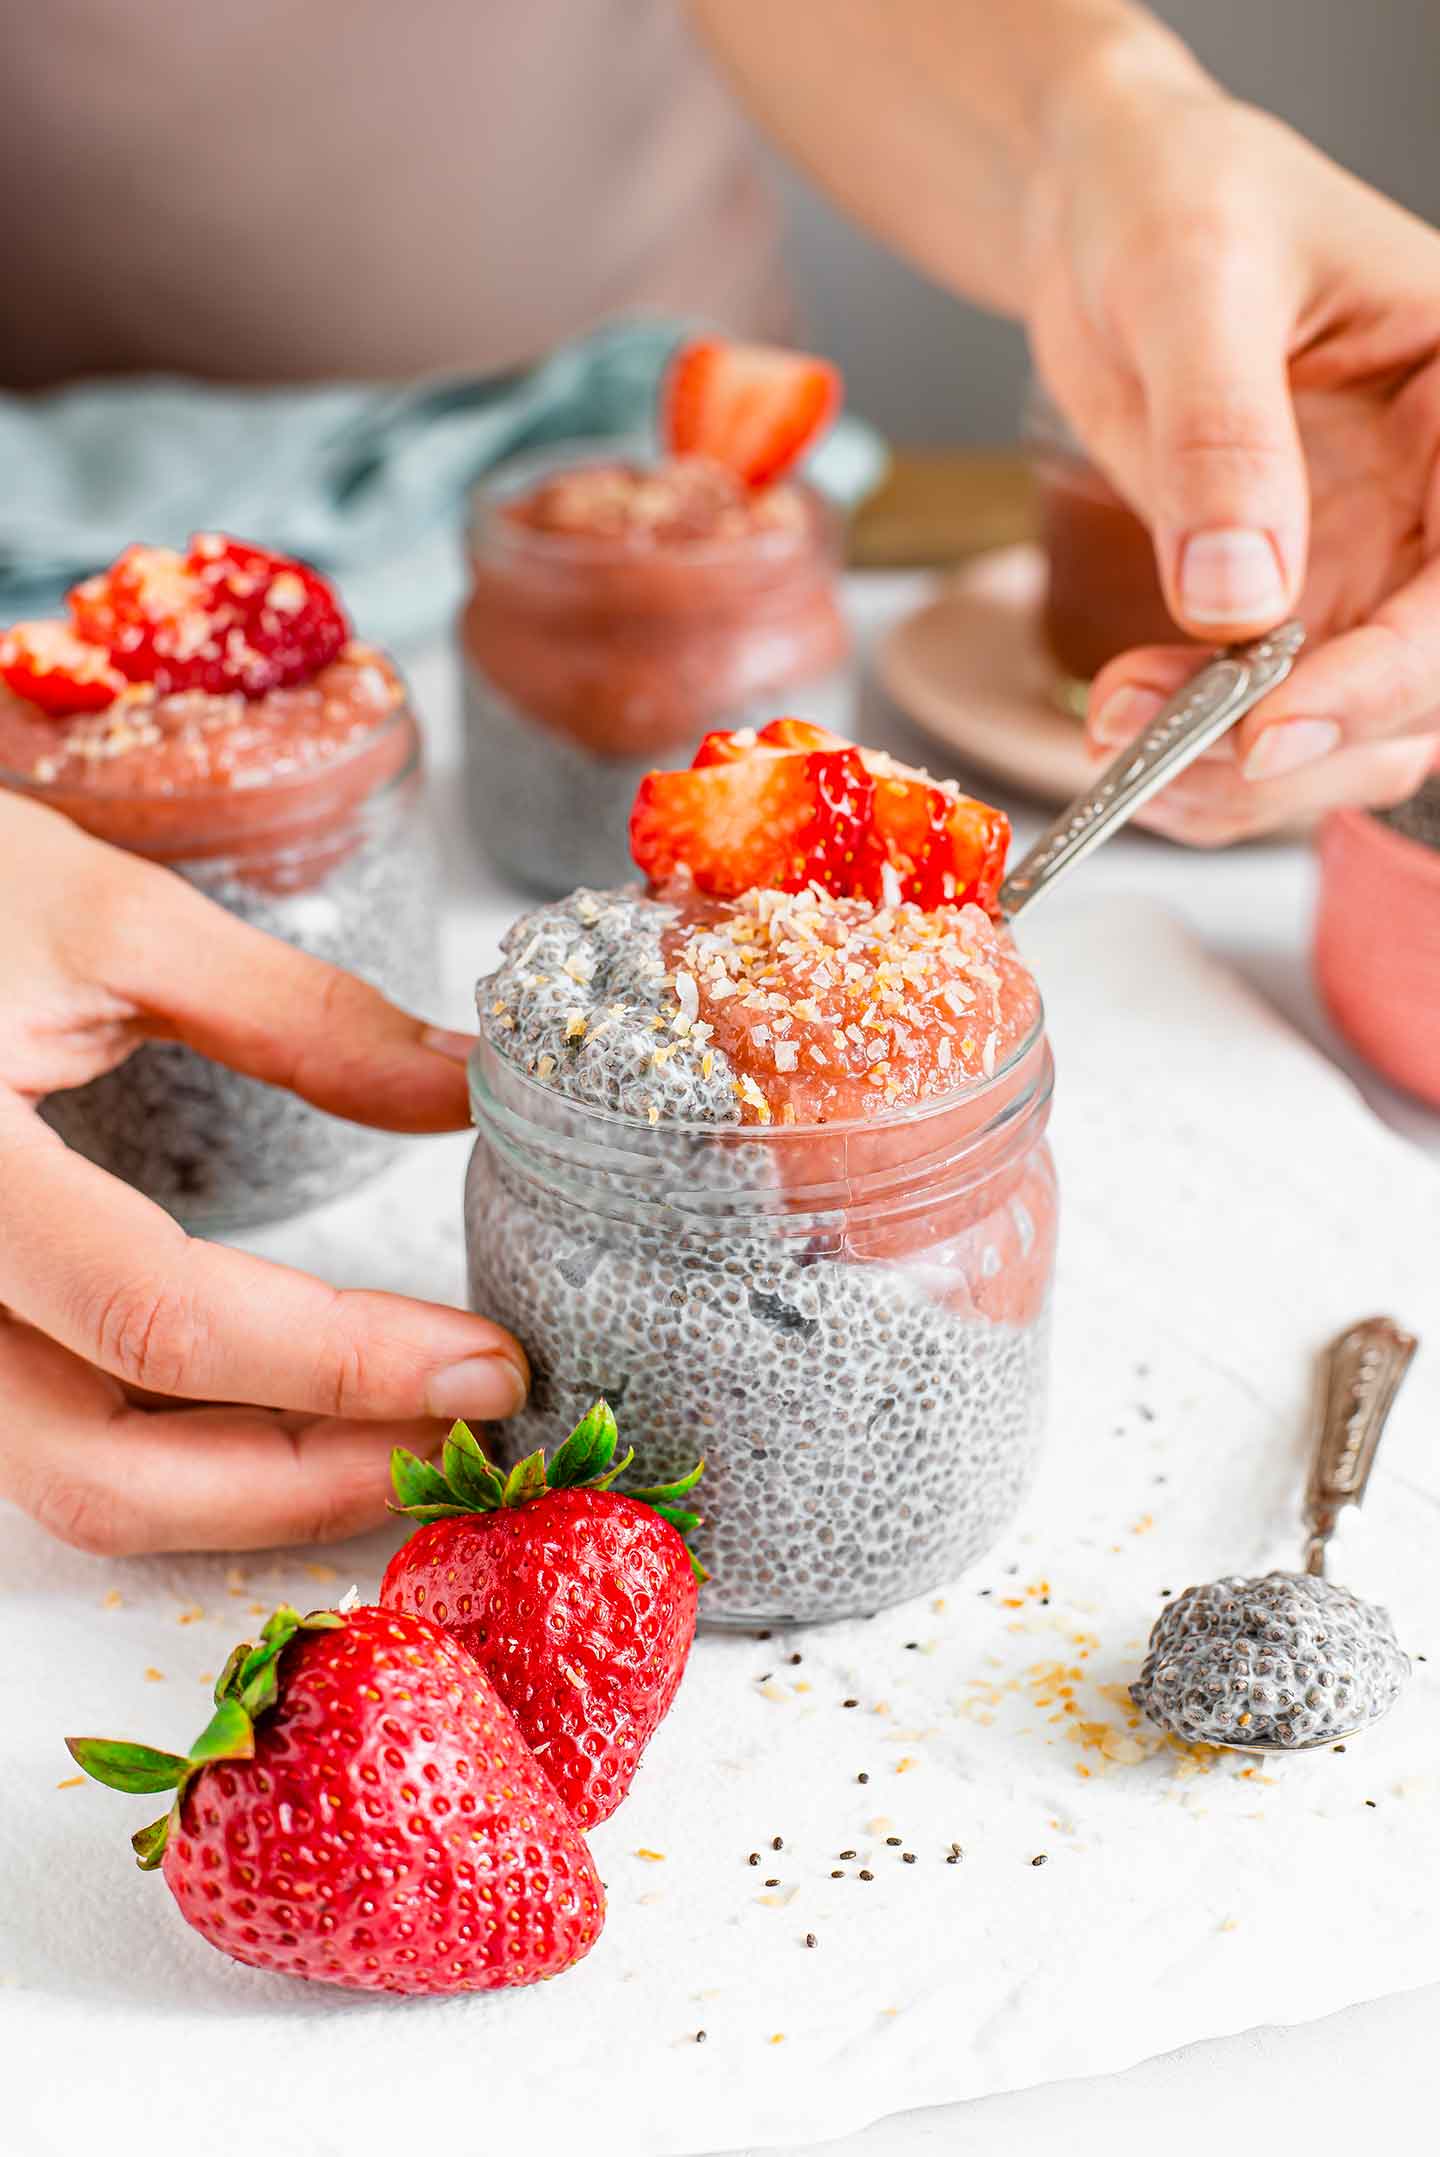 Side view of a hand dipping a spoon into a small glass jar of creamy chia pudding. The chia seeds are visible in the white pudding, pink jam fills a corner of the jar and the pudding is topped with sliced strawberry and toasted coconut.